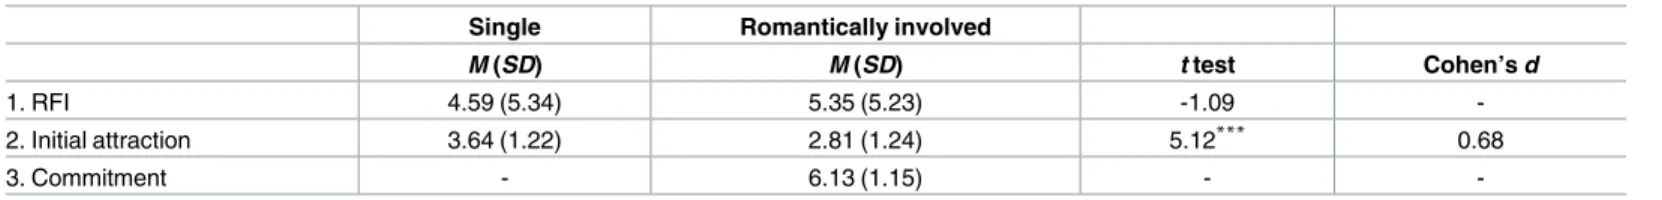 Table 1. Descriptive information for single participants and for romantically involved participants (Study 1).